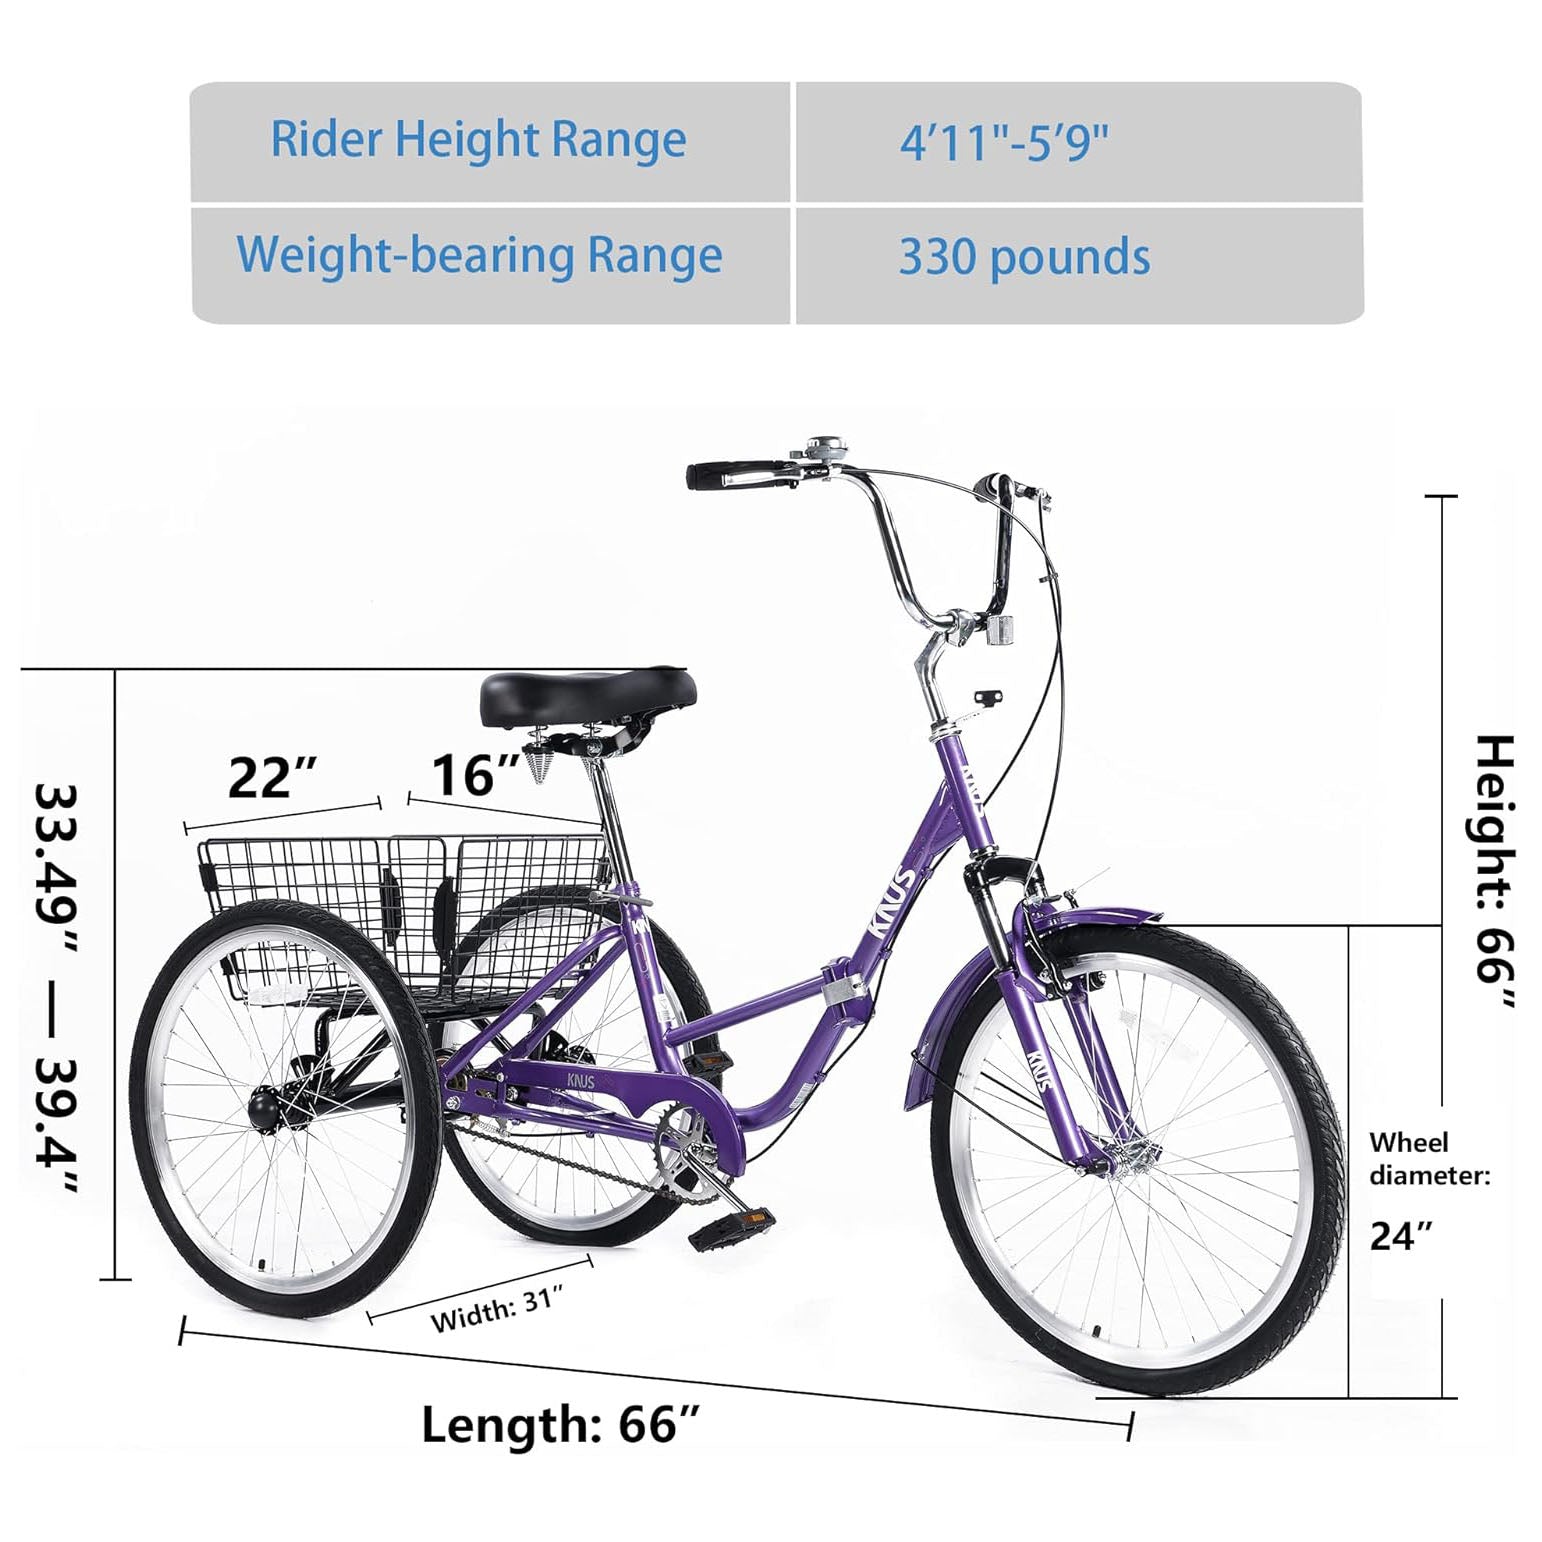 Knus 24" Foldable Single-Speed Tricycle size